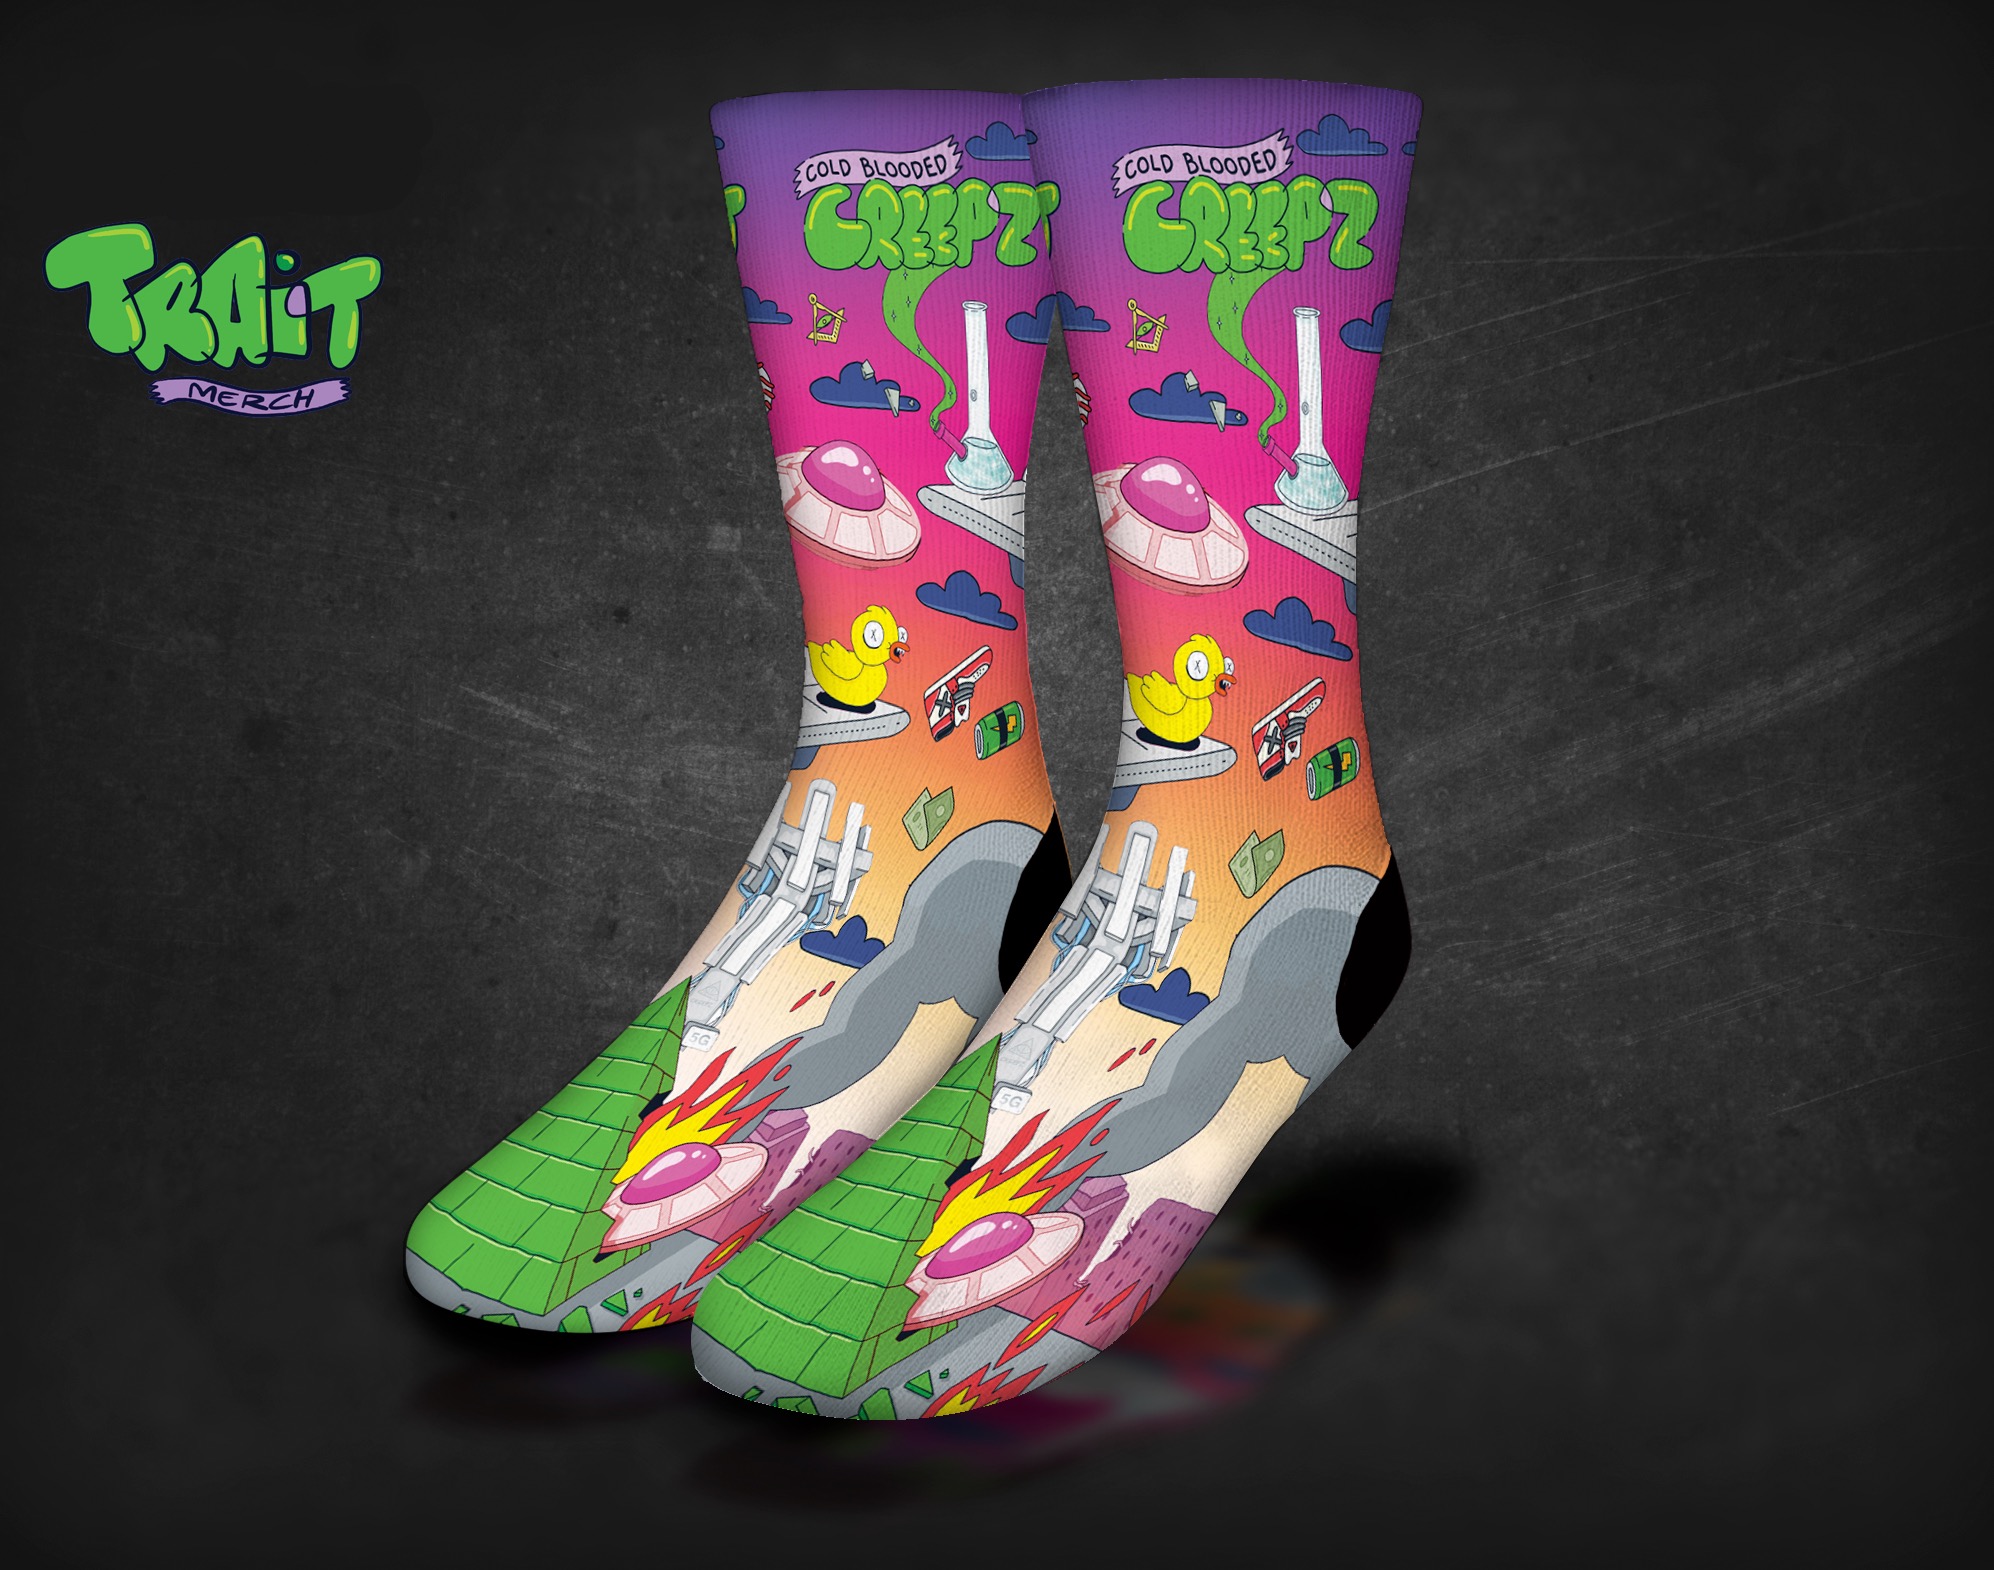 Cold Blooded Creeps Socks 